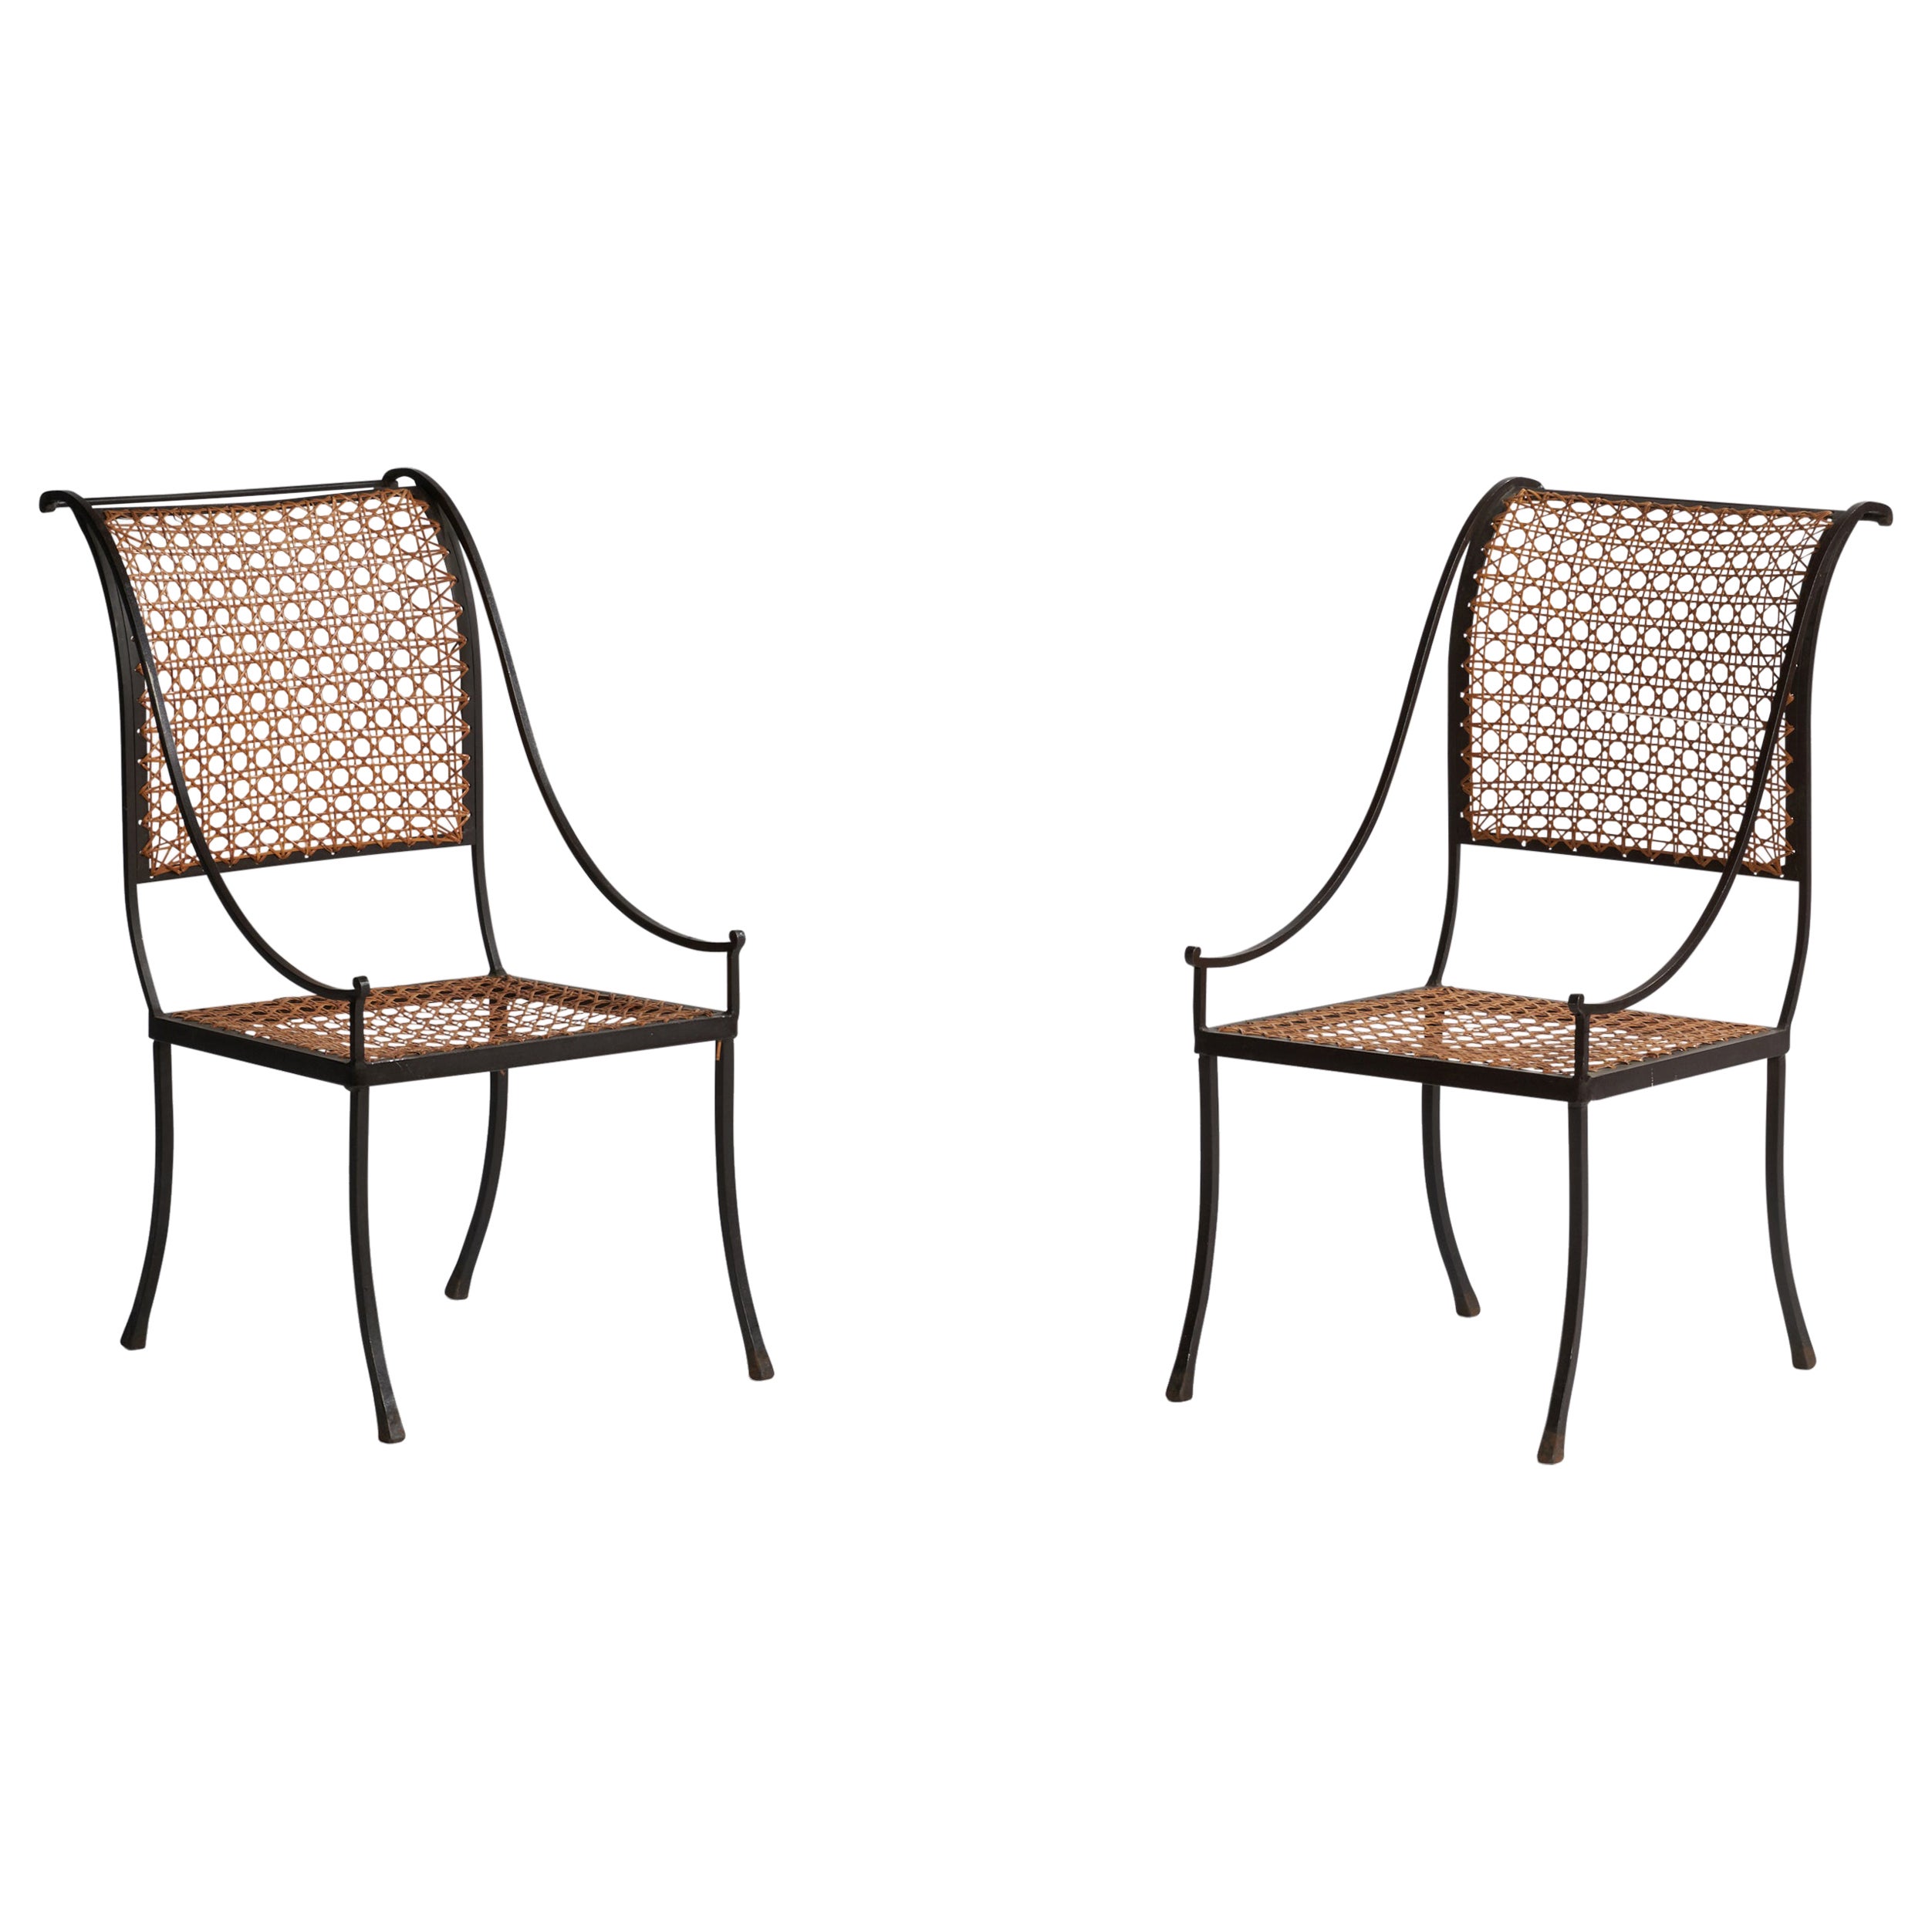 John Vesey, Arm Chairs, Wrought Iron, Cane, USA, 1950s